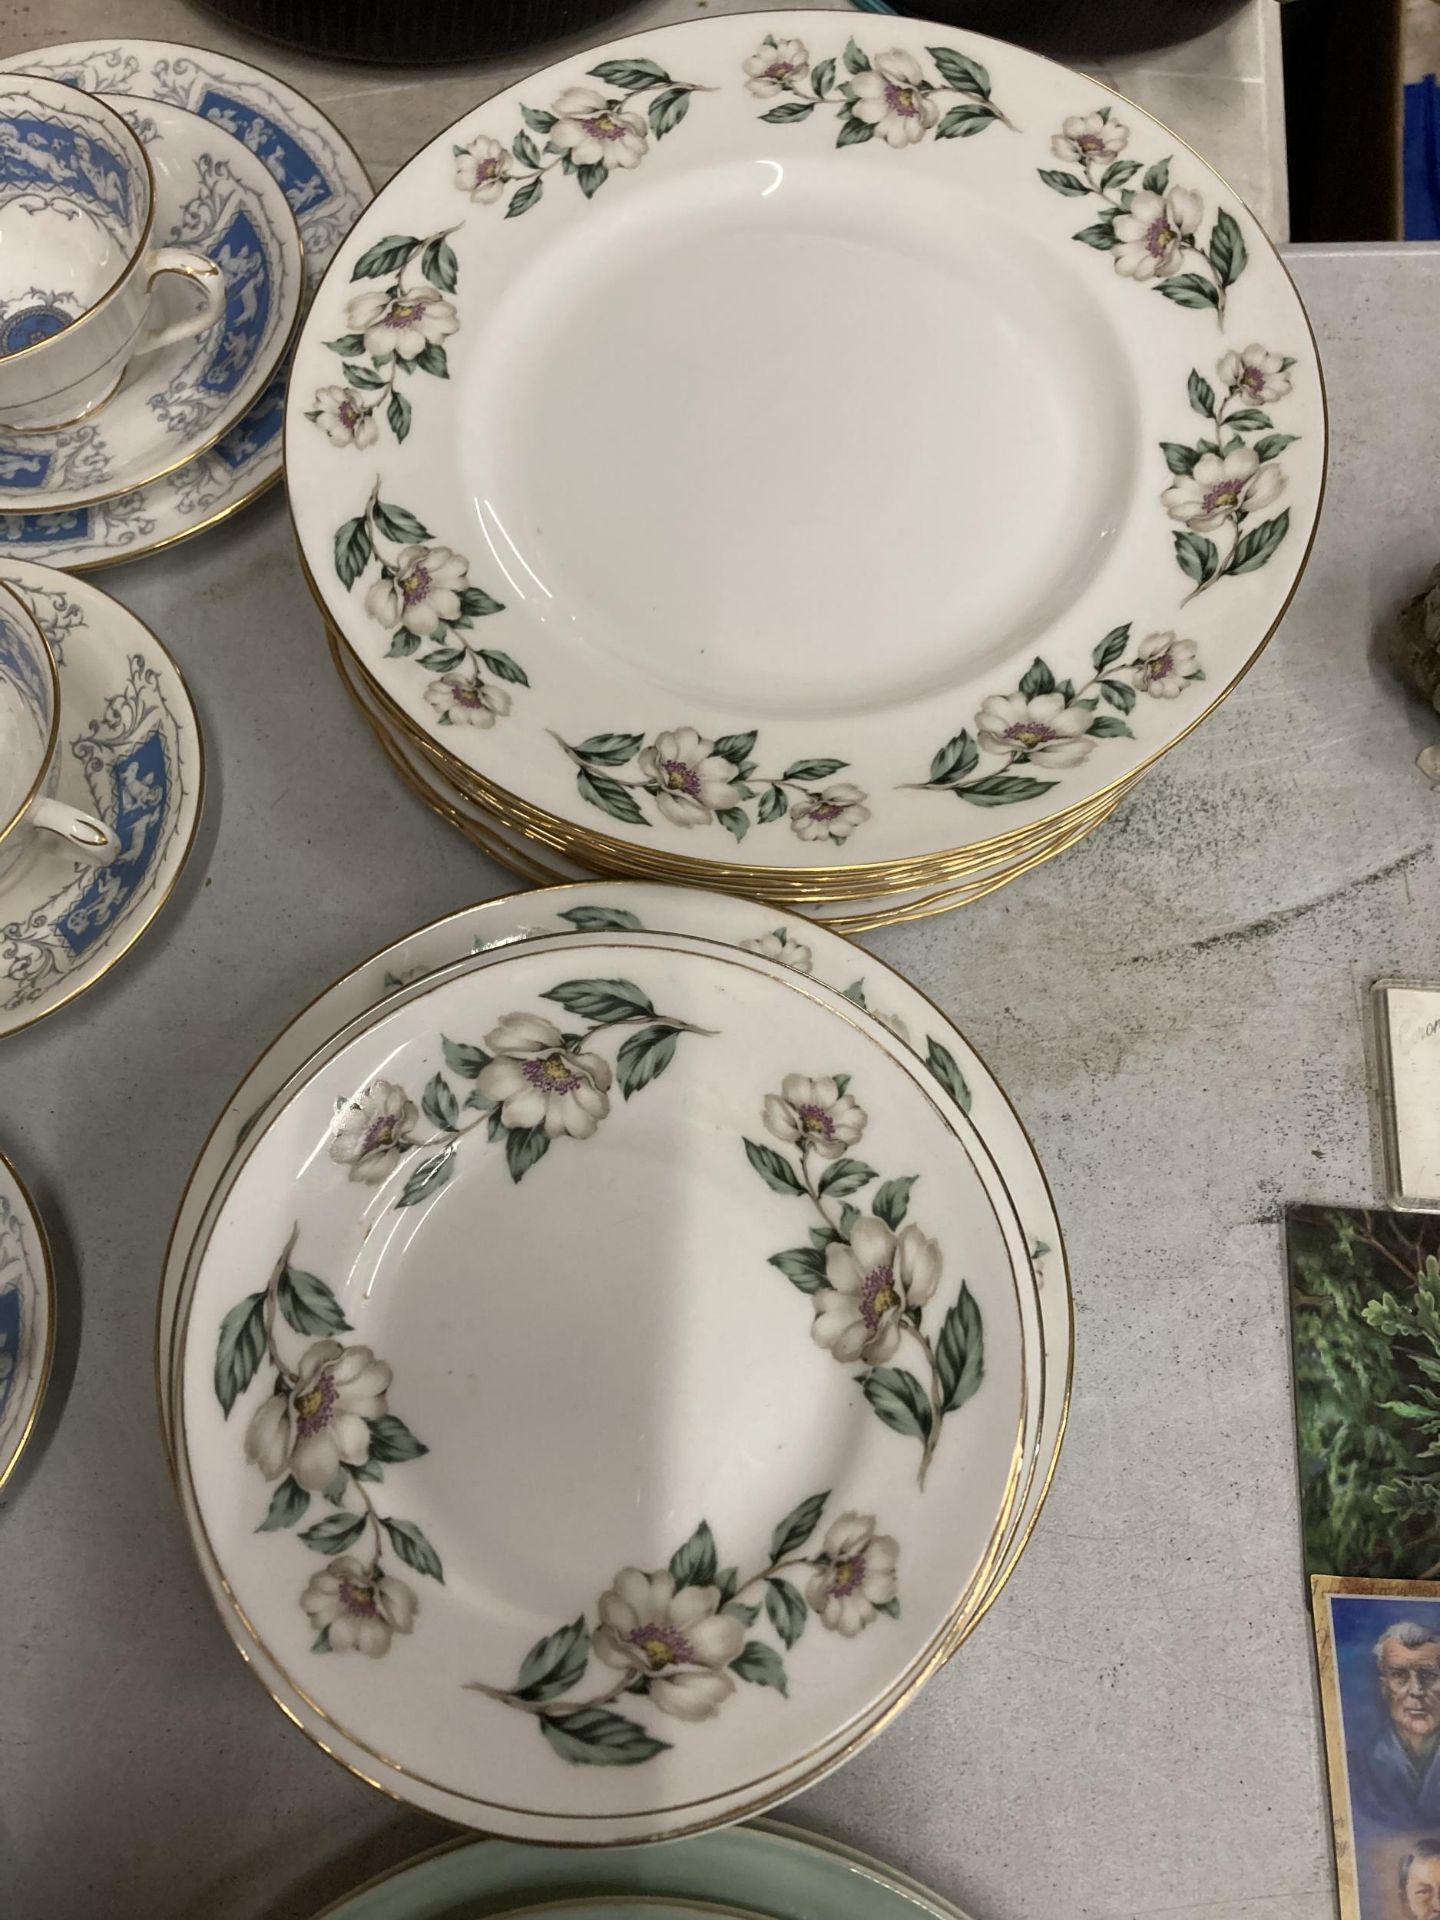 A COALPORT REVELRY PART DINNER SERVICE AND CROWN STAFFORDSHIRE PLATES - Image 5 of 7